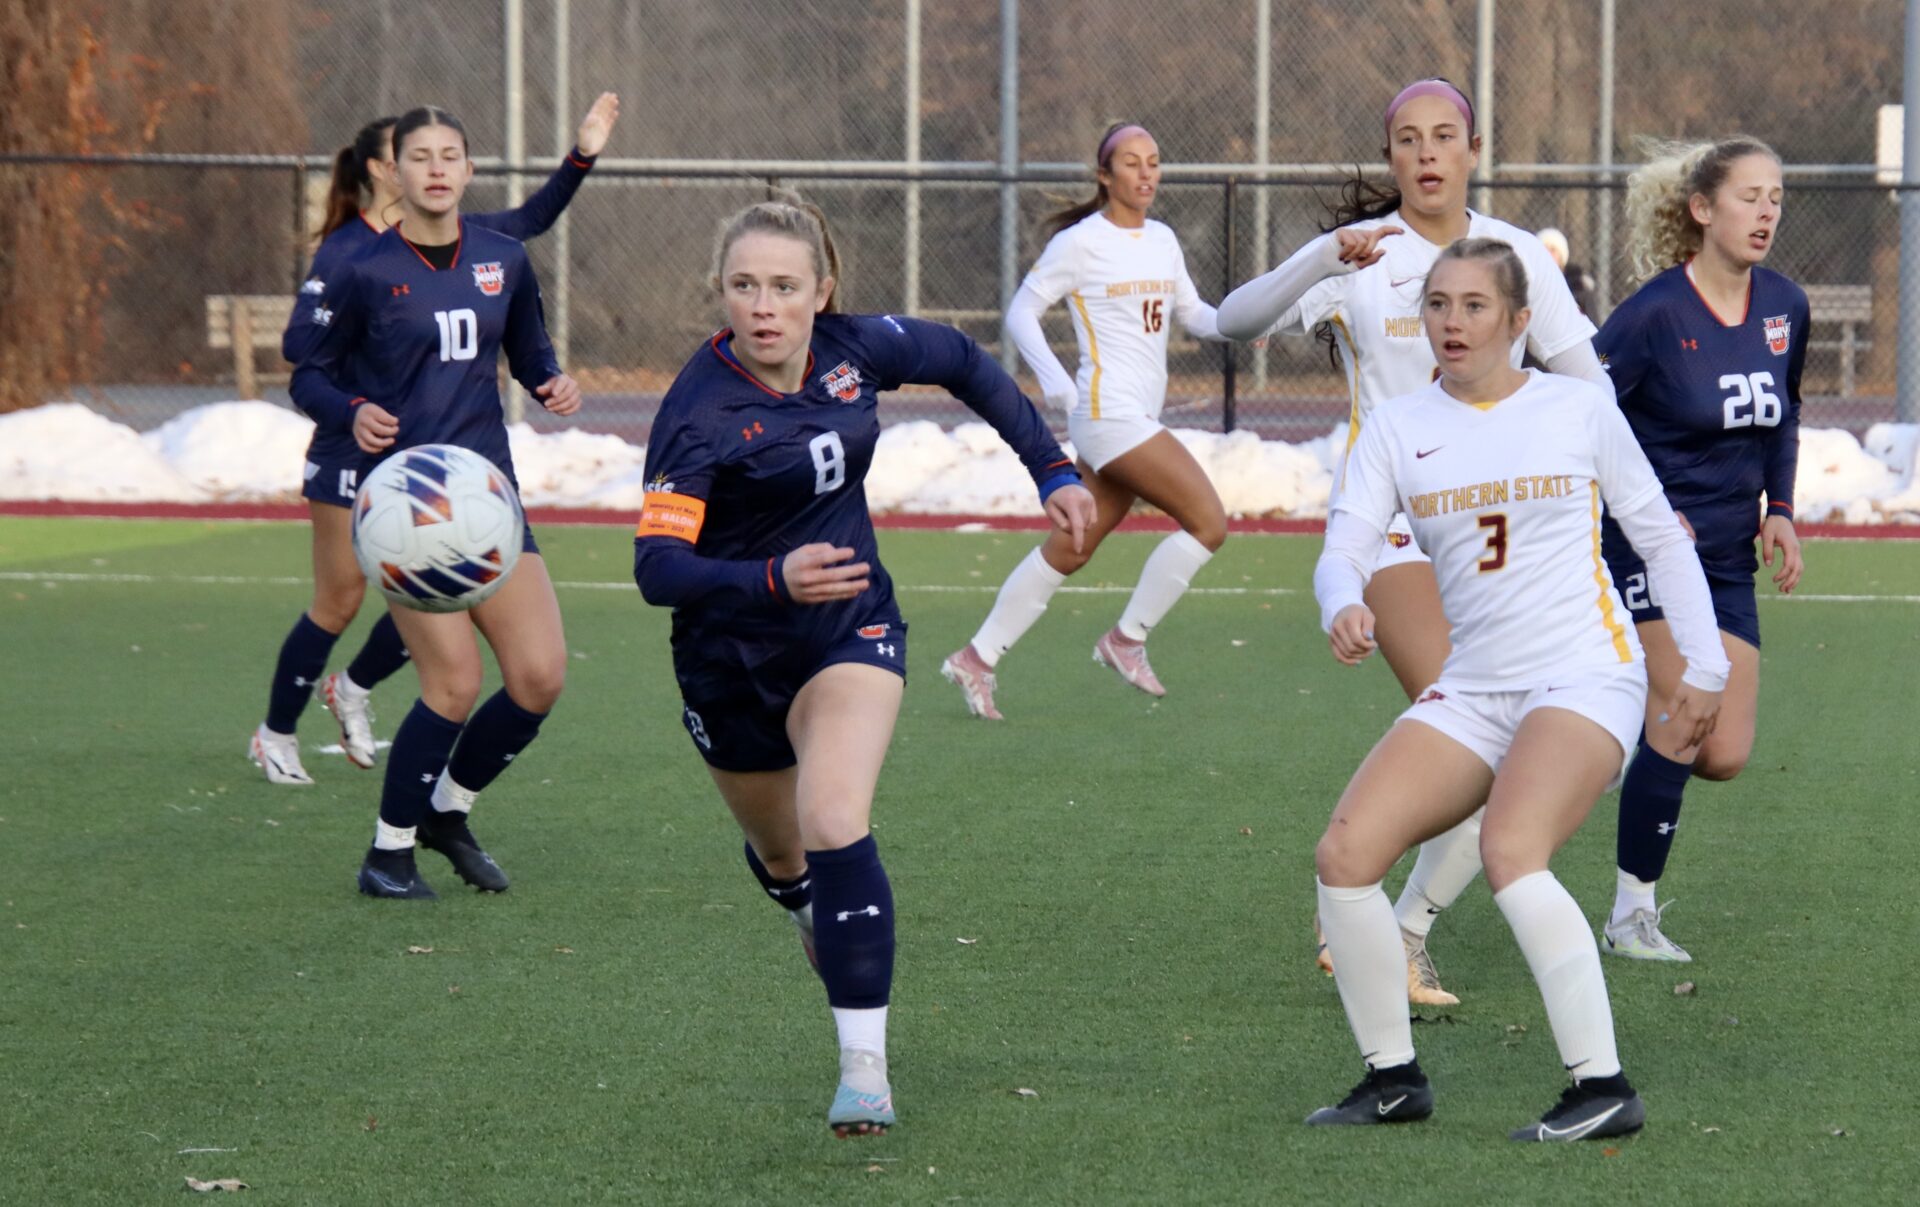 The University of Mary's Mo Malone, left, approaches the ball during a Thursday, Nov. 2 women's soccer game against Northern State. To the right of Malone is Chloe Voss of the Wolves. Northern won the game, but the Marauders won a rematch on Monday, Nov. 6 in the Northern Sun Intercollegiate Conference semifinals. Aberdeen Insider photo by Scott Waltman